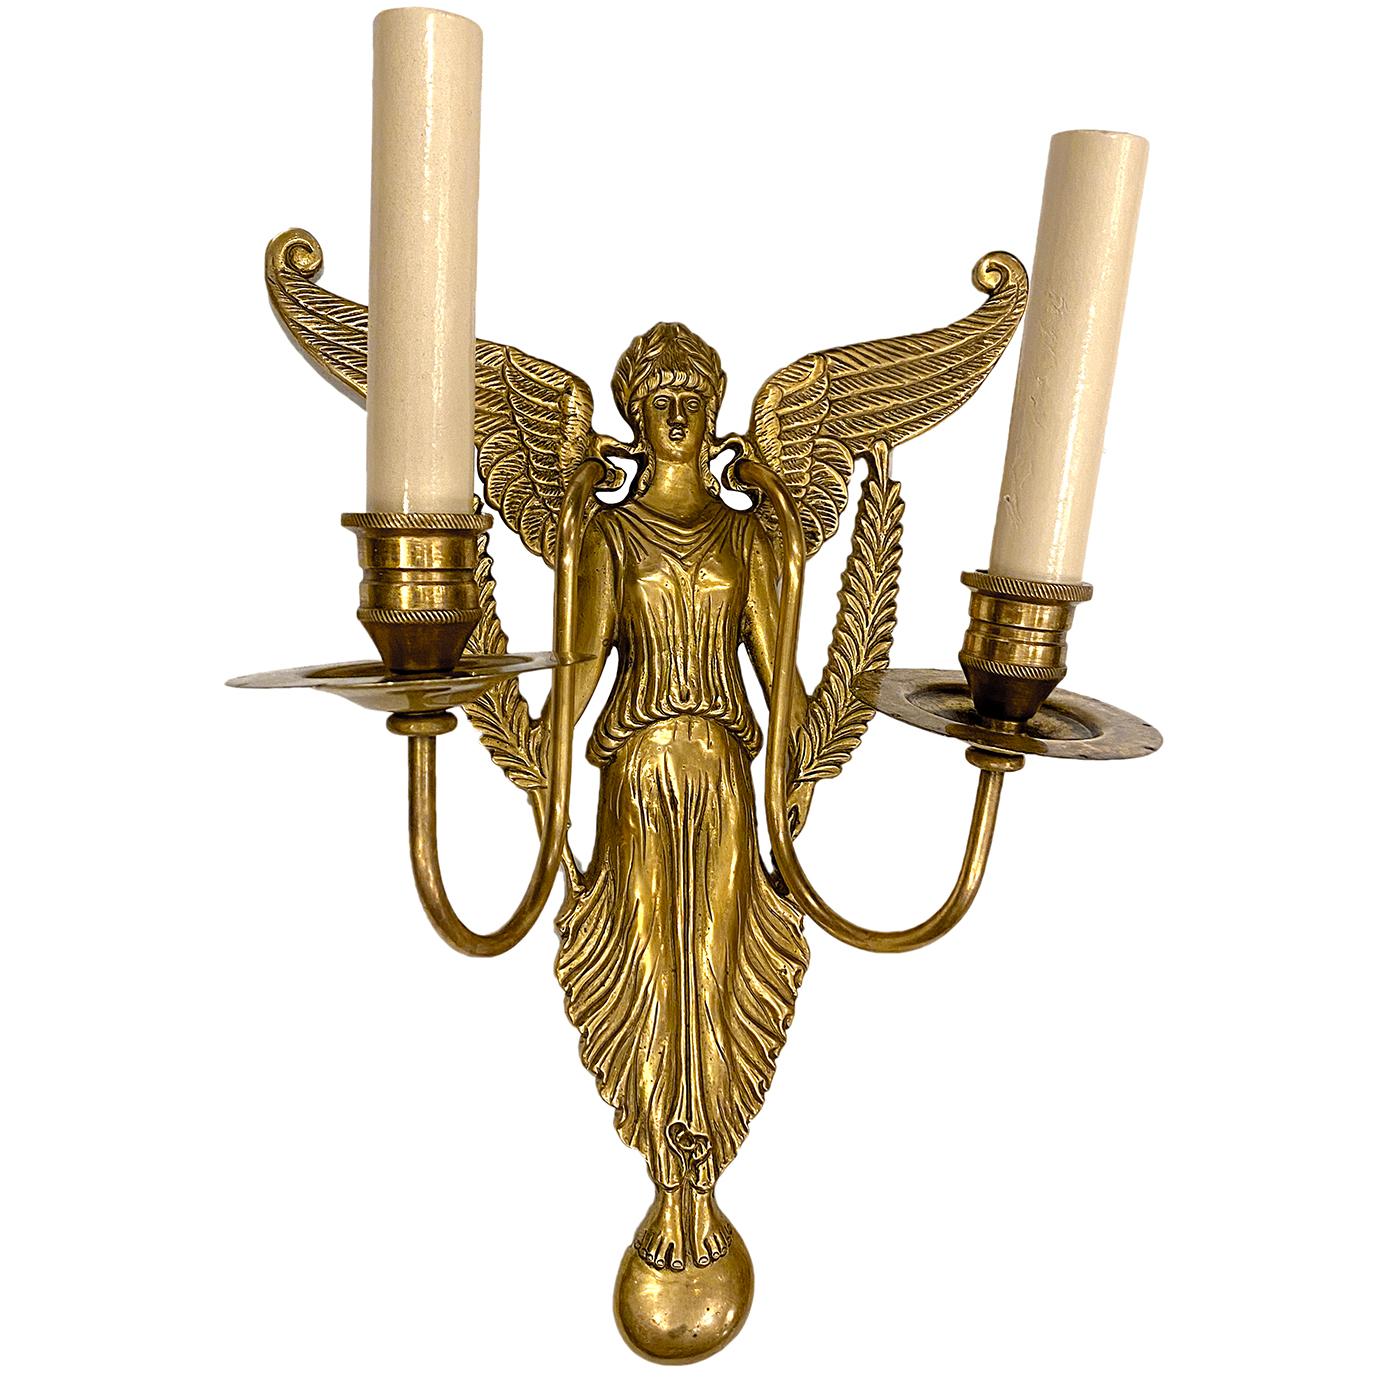 A set of eight circa 1930's gilt bronze double light Empire style sconces. Sold per pair.

Measurements:
Height 13.5